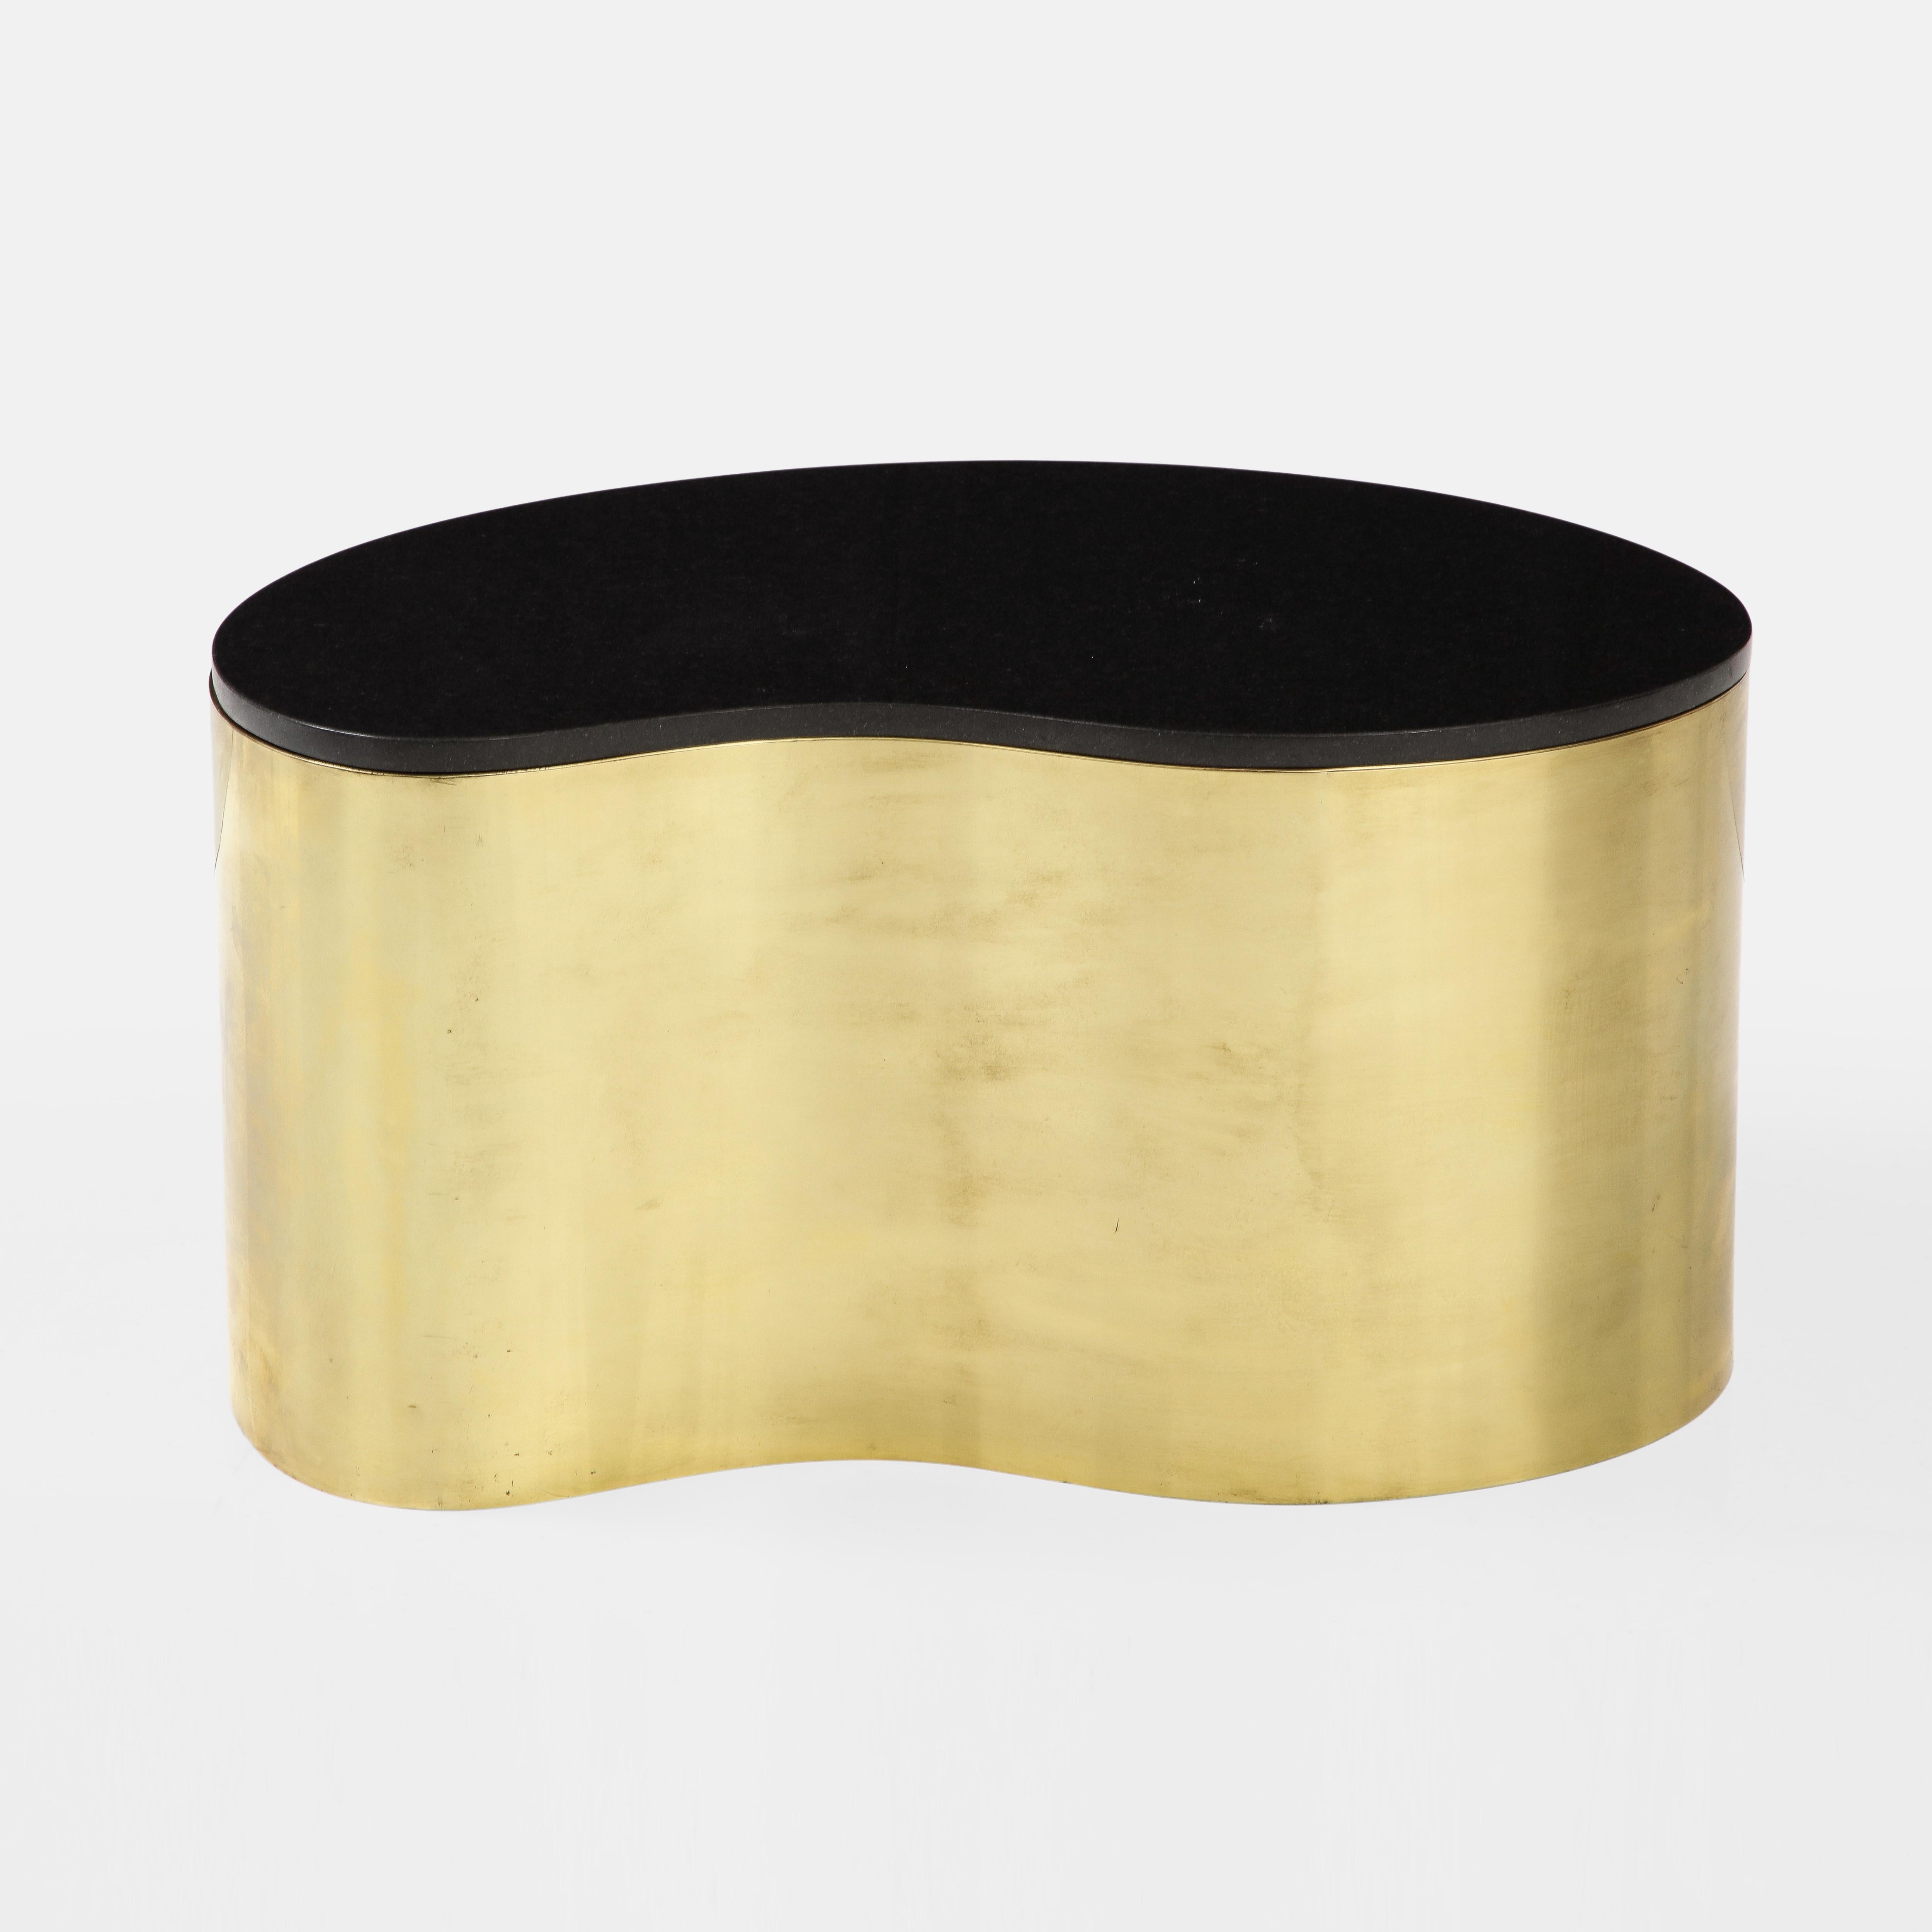 Karl Springer Freeform Coffee Table in Brass and Black Granite Top, 1970s For Sale 4